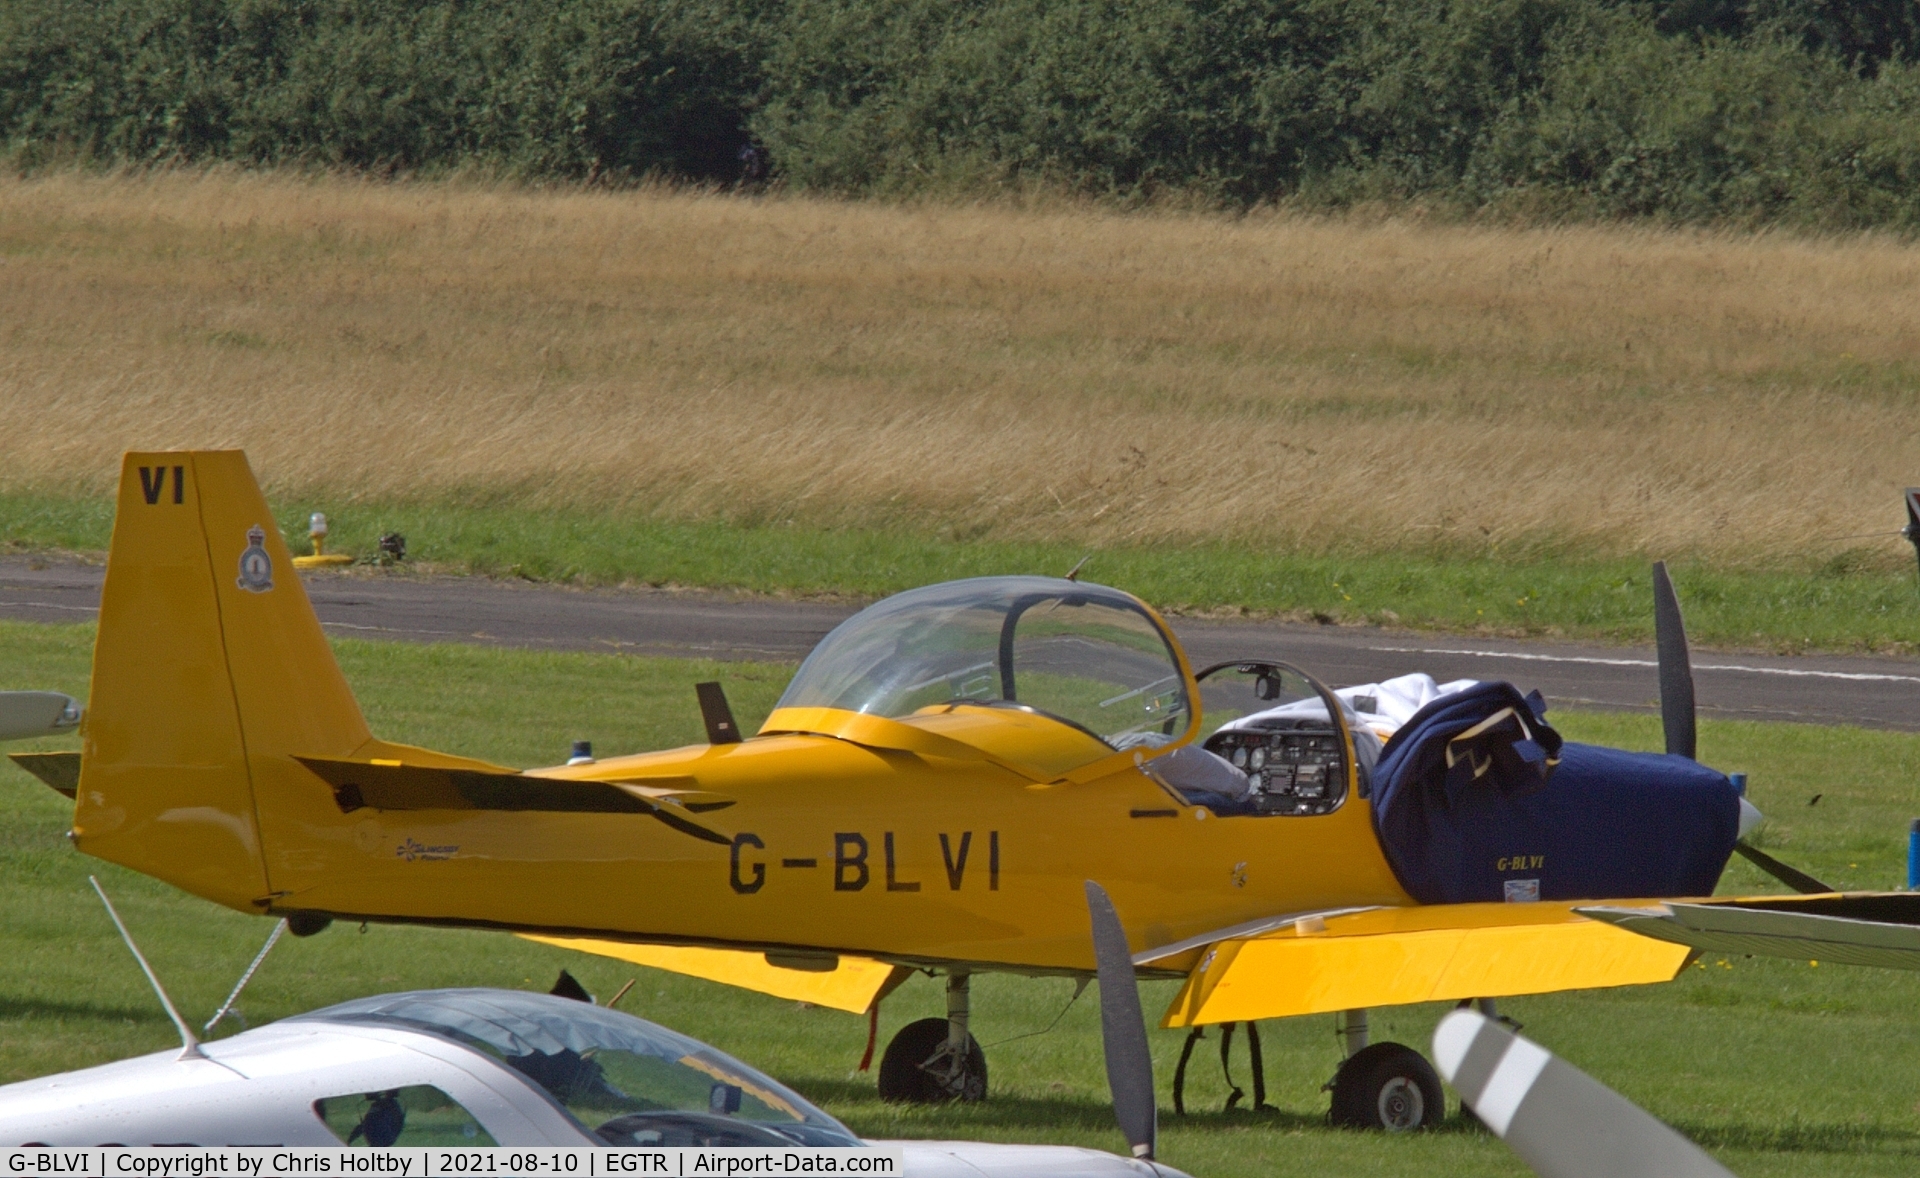 G-BLVI, 1986 Slingsby T-67M Firefly Mk2 C/N 2017, Parked and being maintained at Elstree